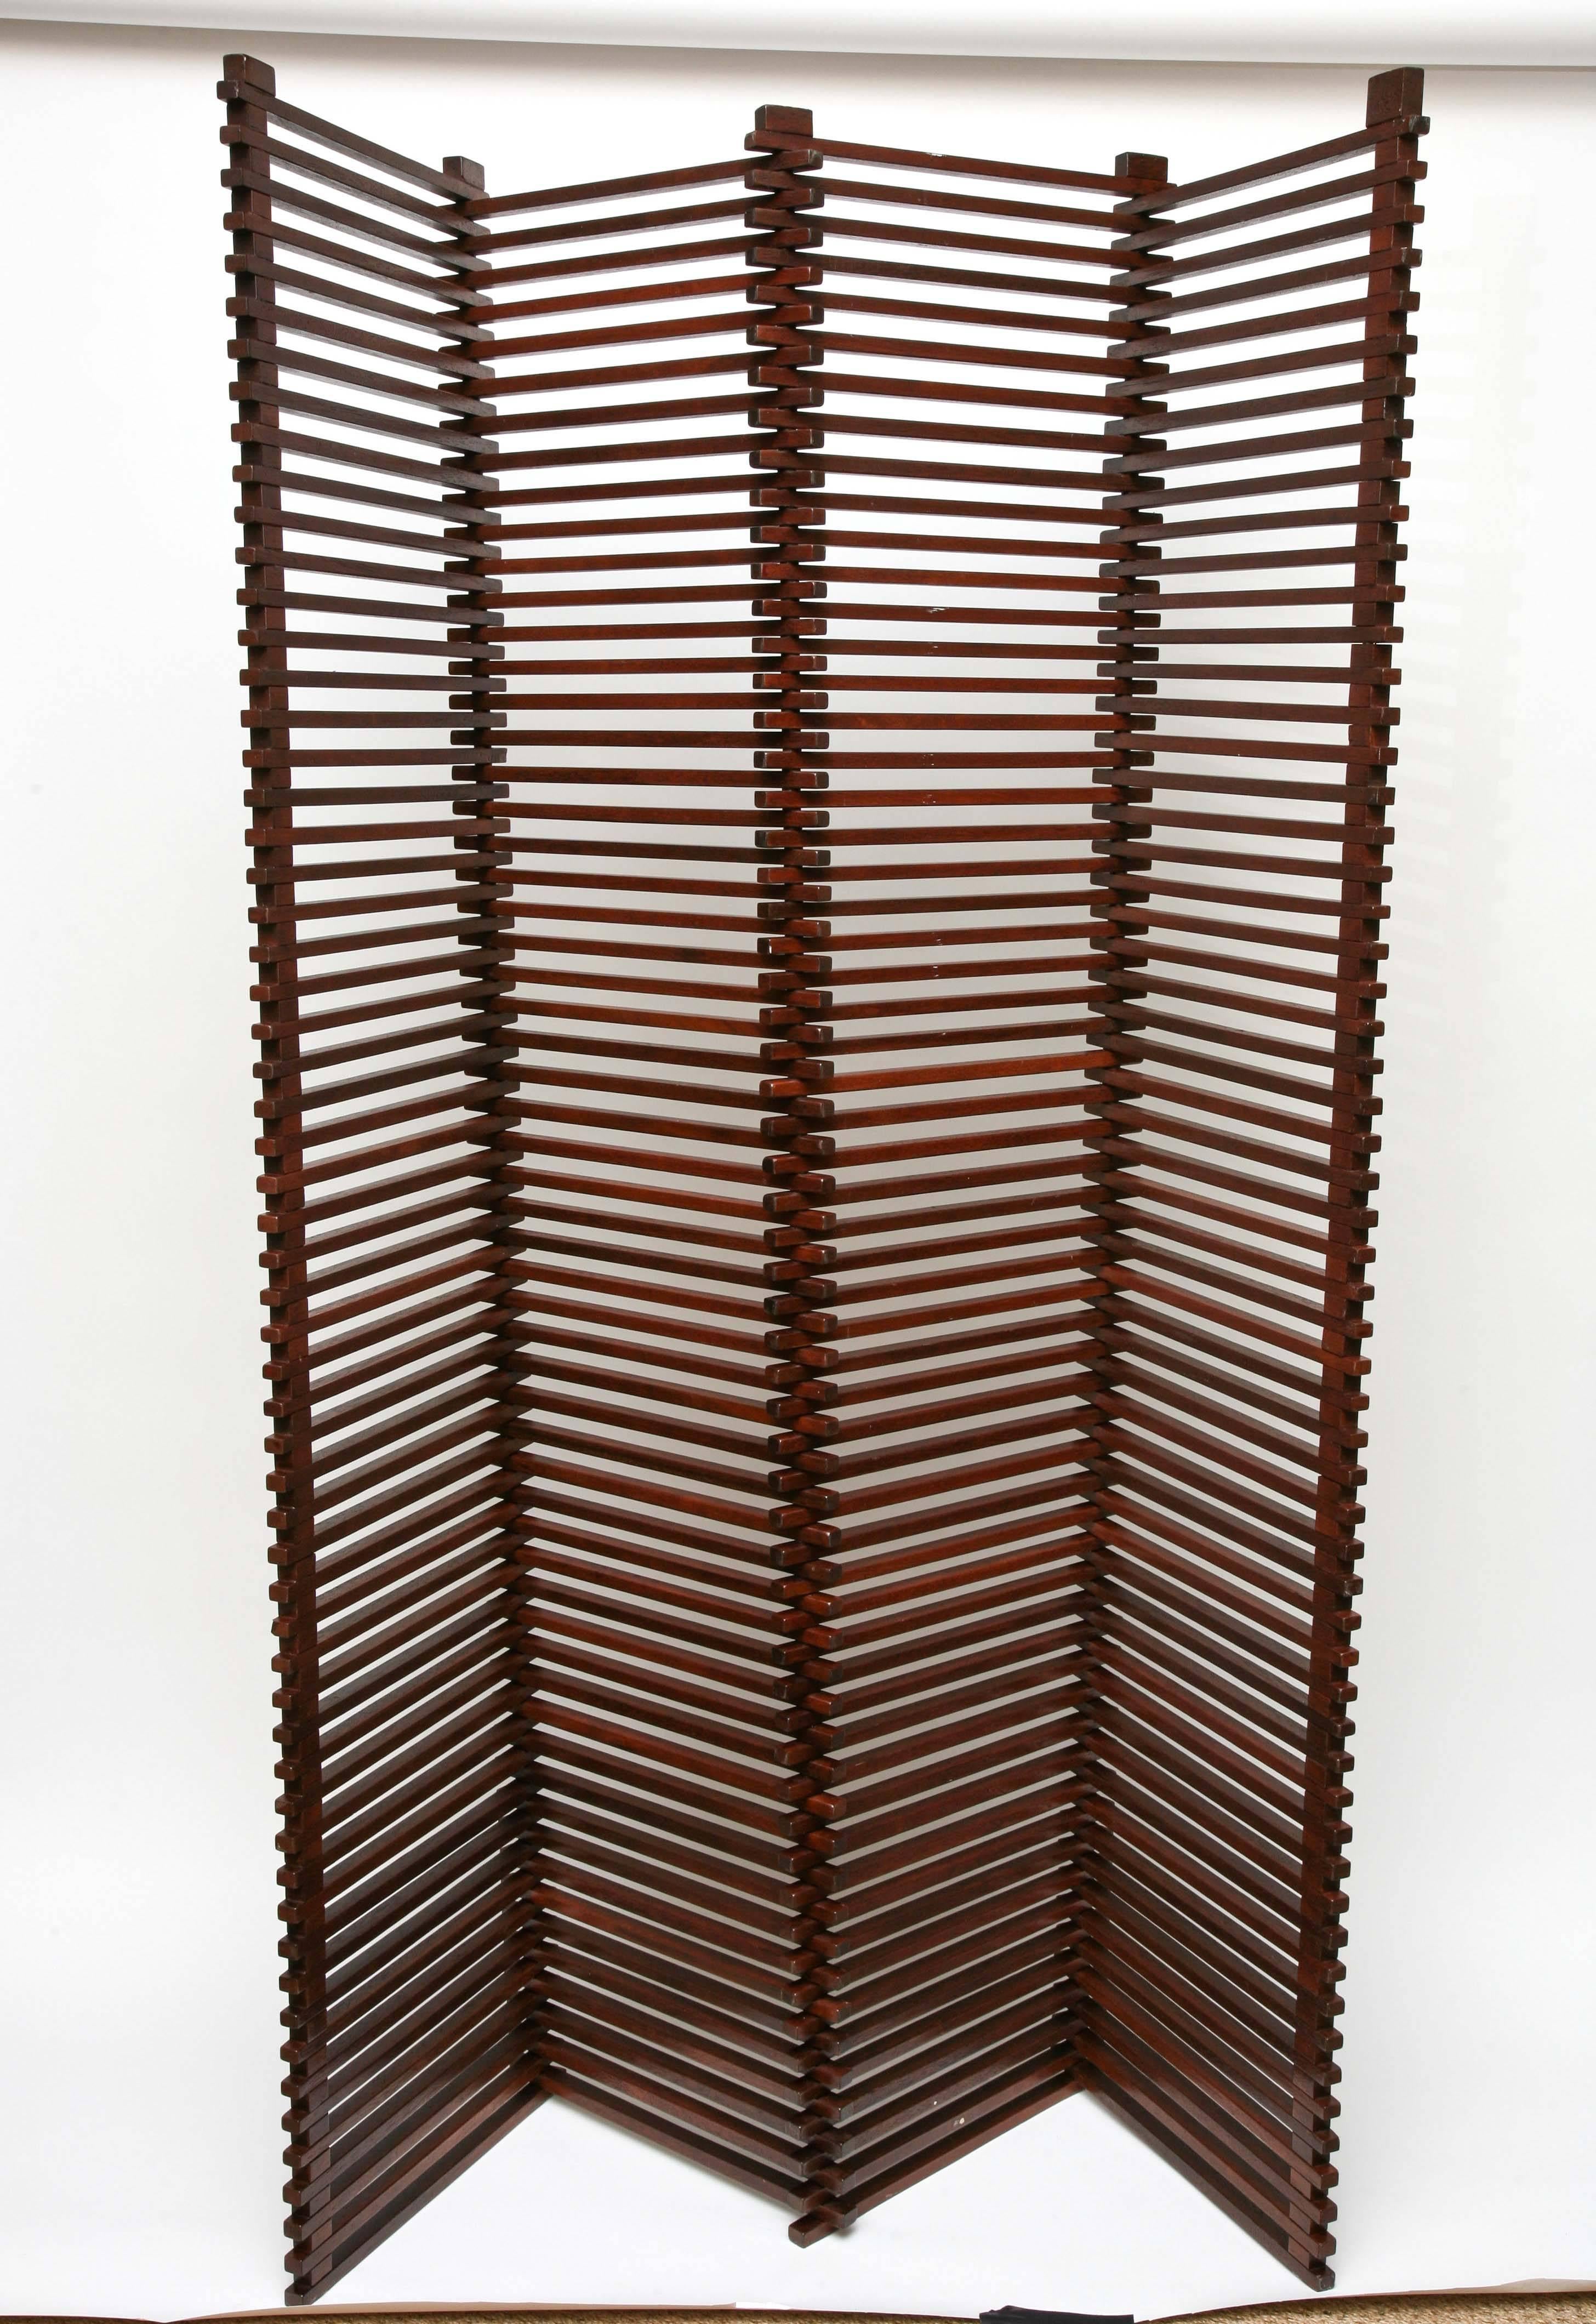 North American Mid-Century Modern Tall Solid Wood Slat Room Divider/Screen/Partition